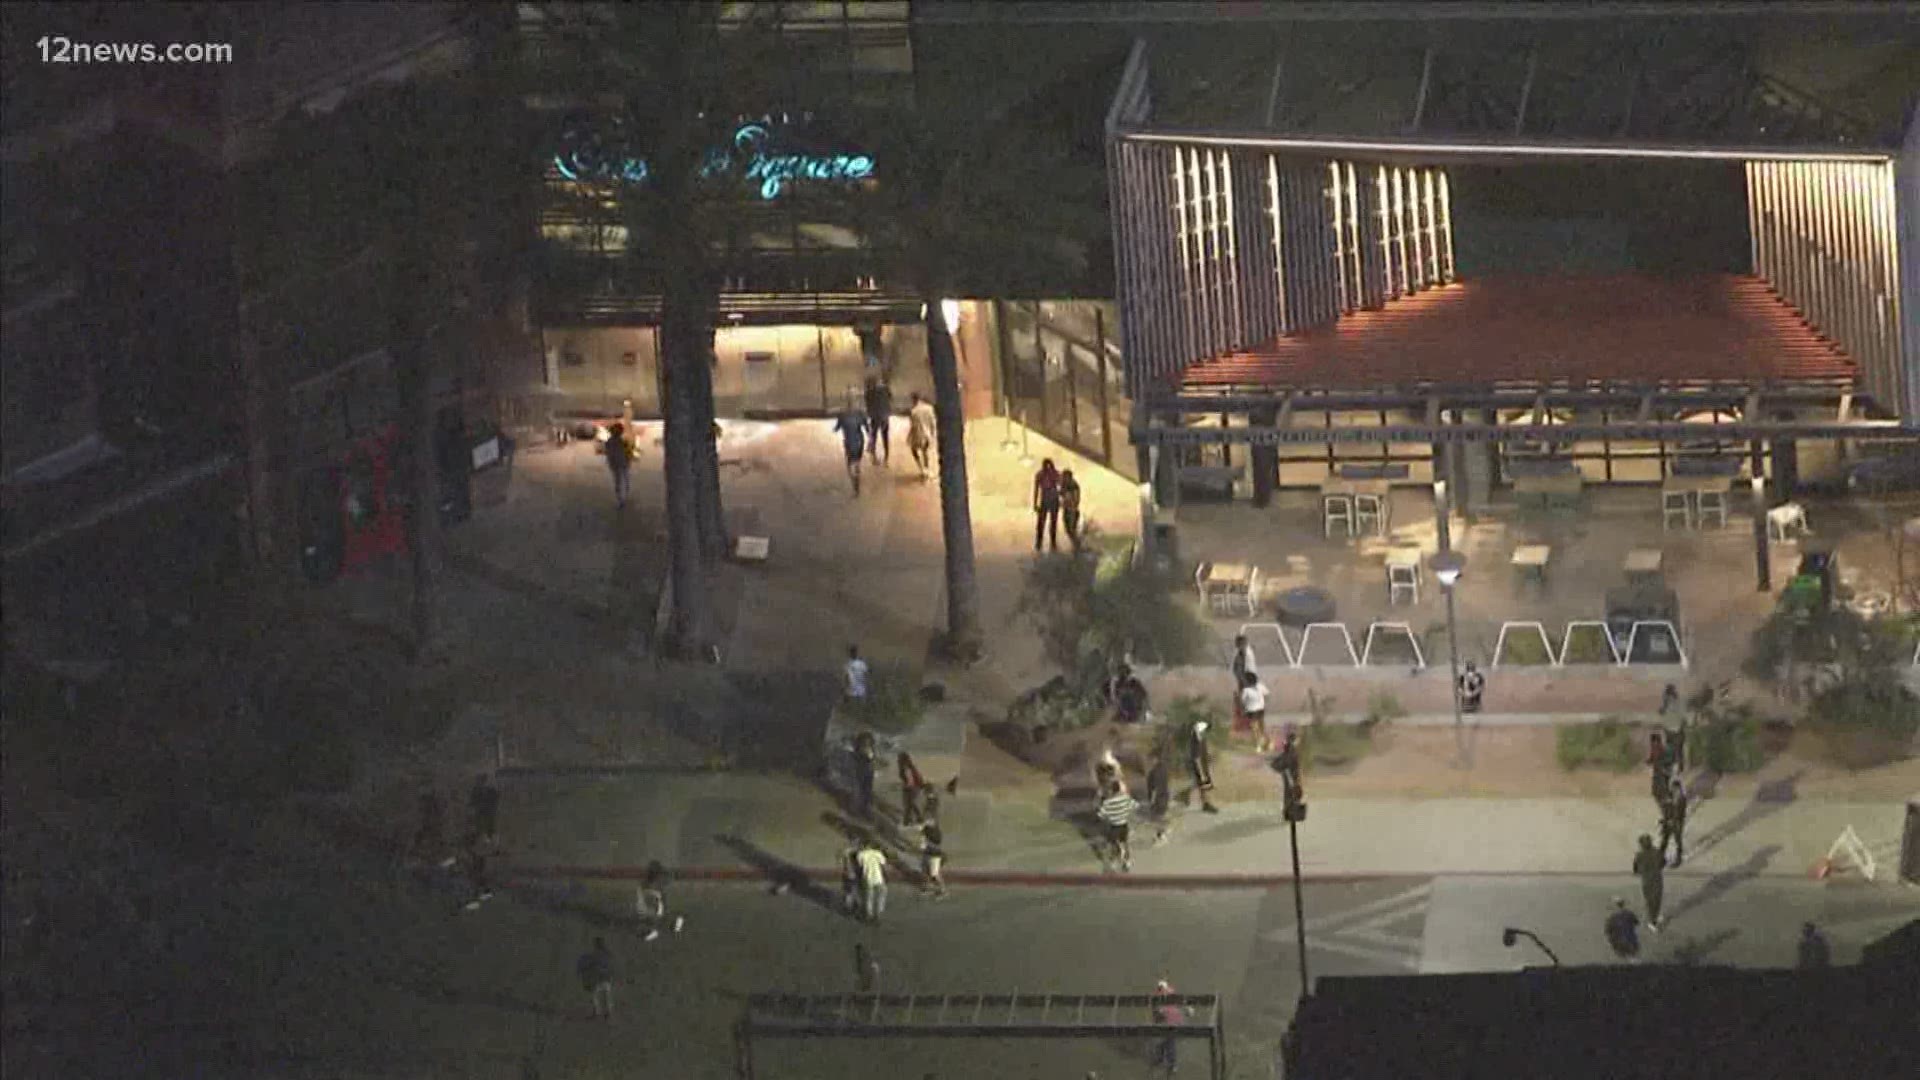 Looting was seen at Scottsdale Fashion Center during protests on Saturday night. Sky 12 was over the scene.